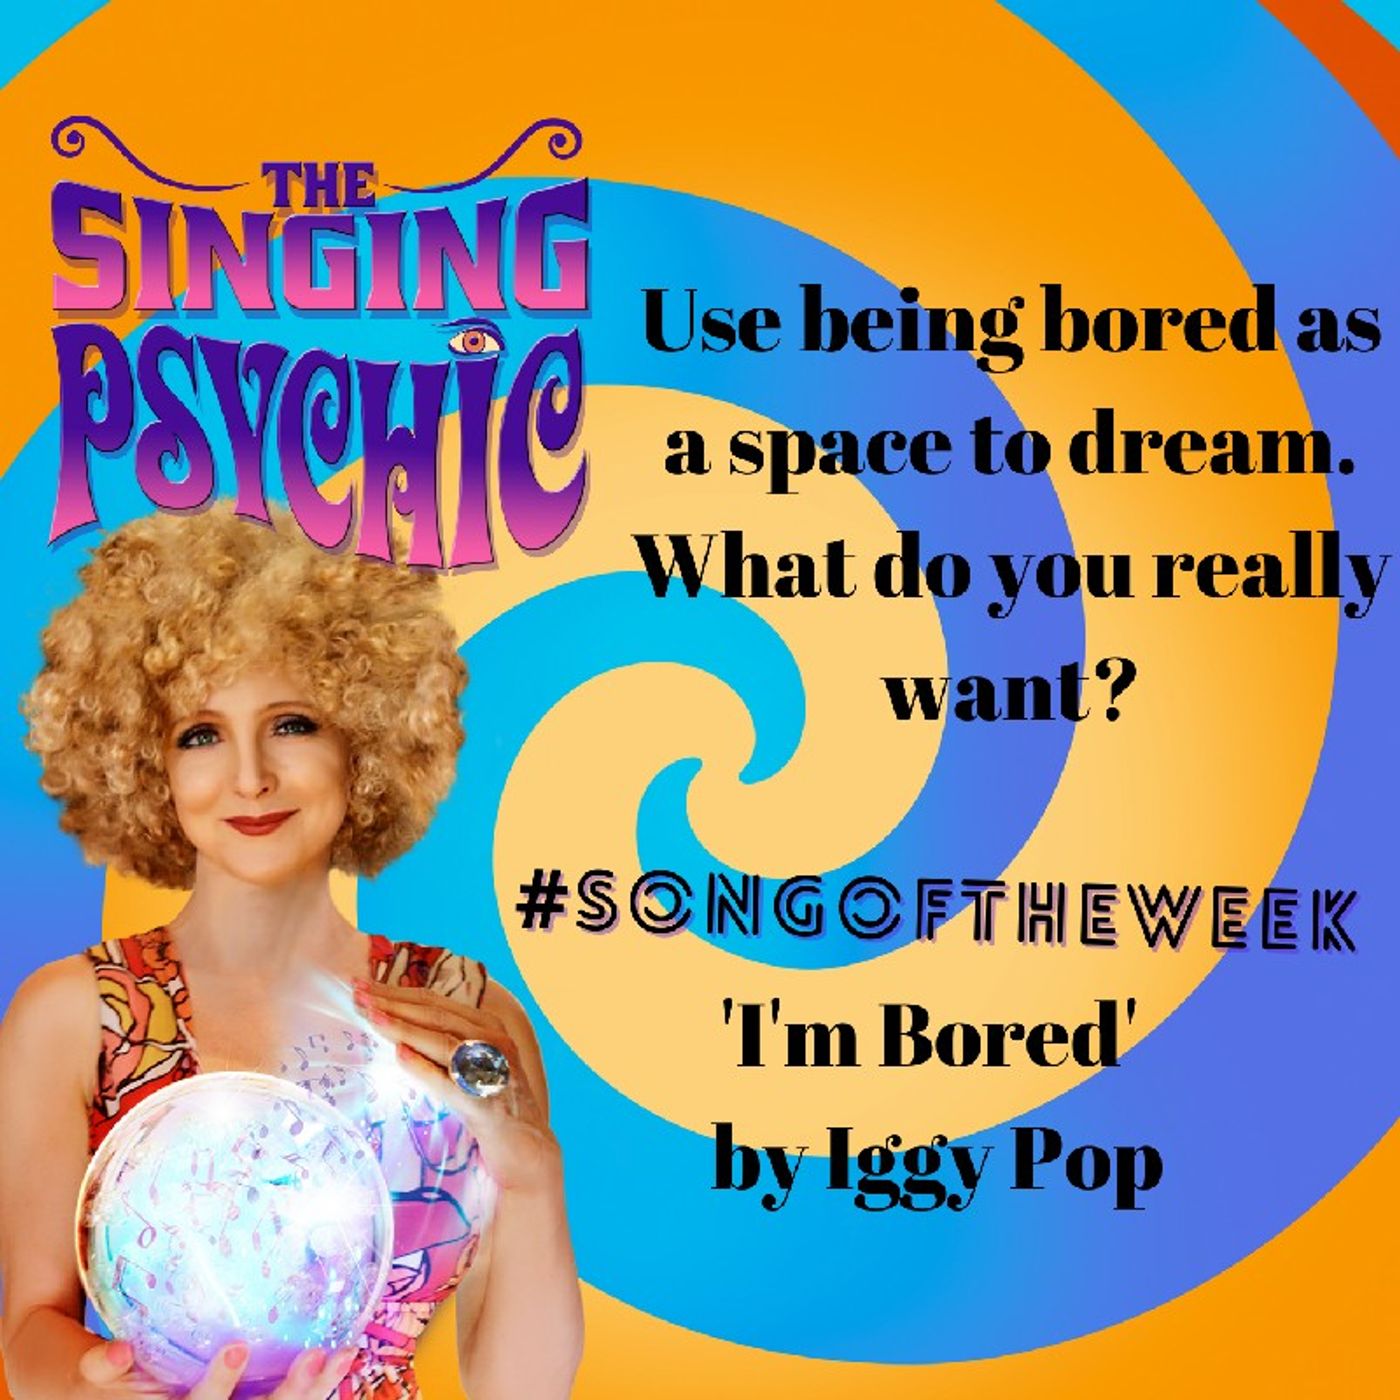 I'm Bored By Iggy Pop Is #SongOfTheWeek - The Singing Psychic